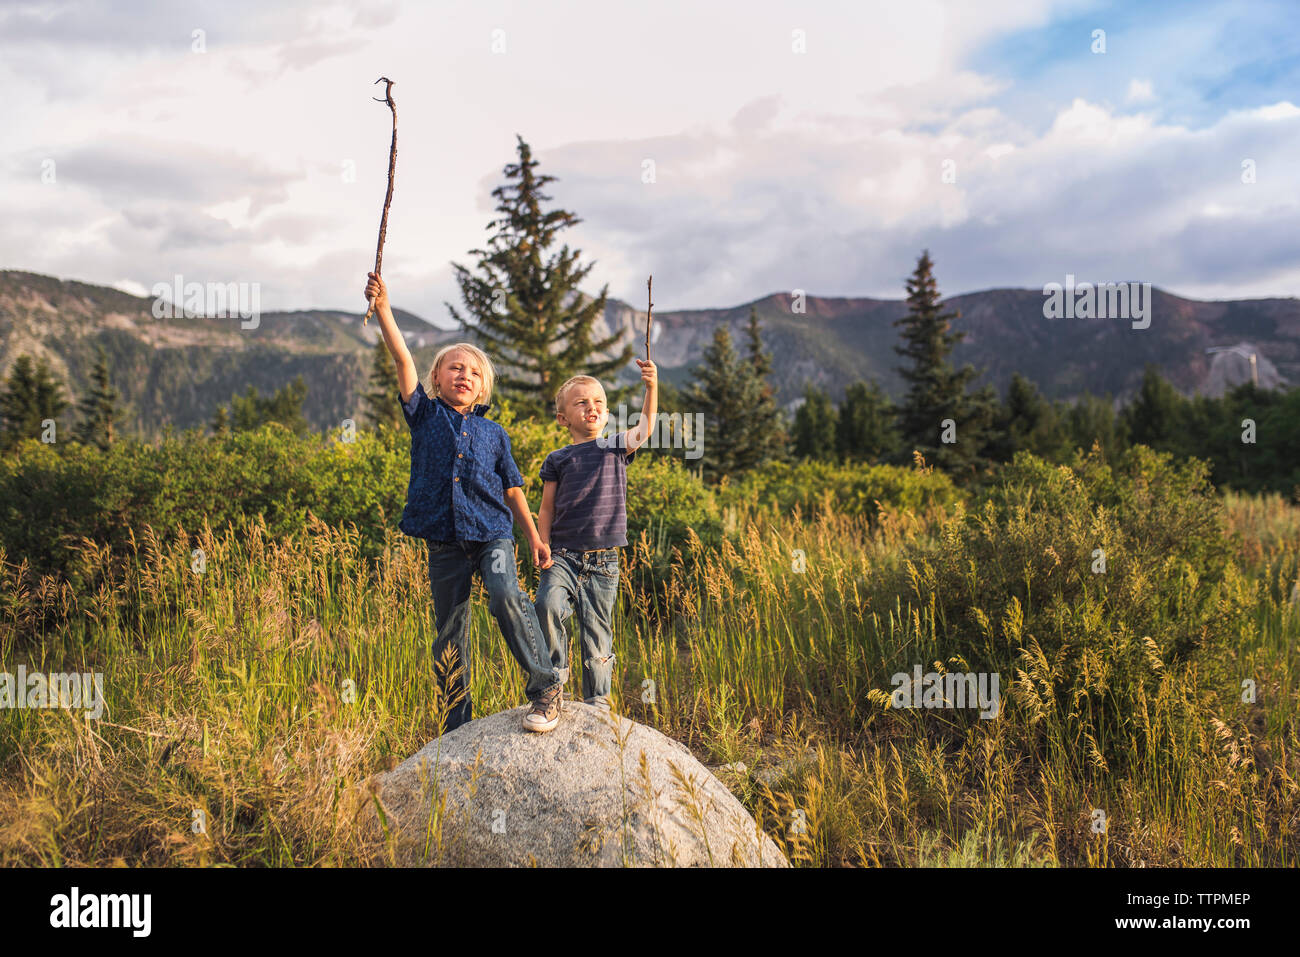 Playful brothers with arms raised holding sticks while standing on rock against mountains Stock Photo